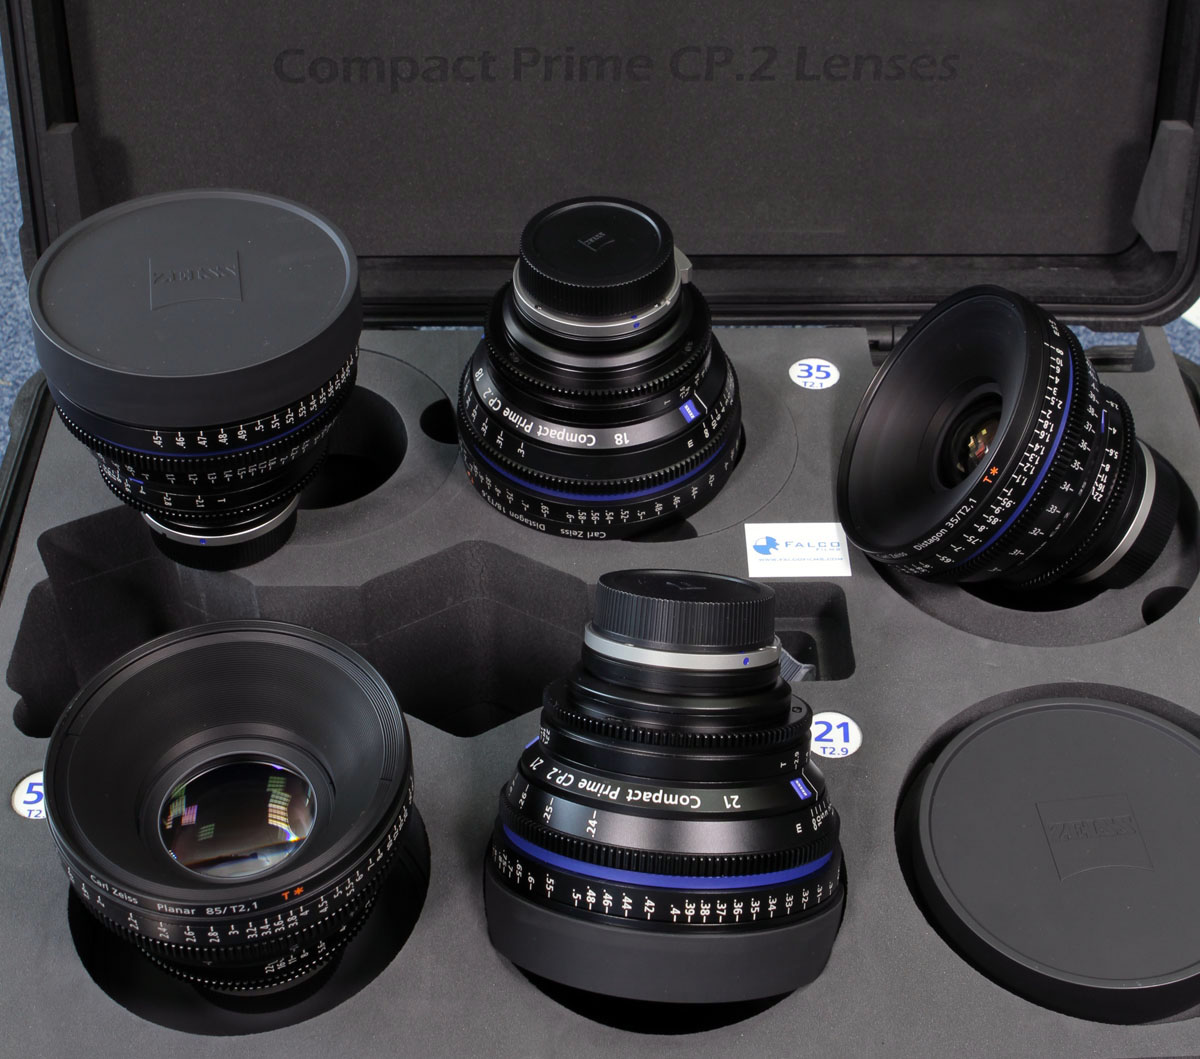  ZEISS Makro Compact Prime CP.2 50mm T2.1